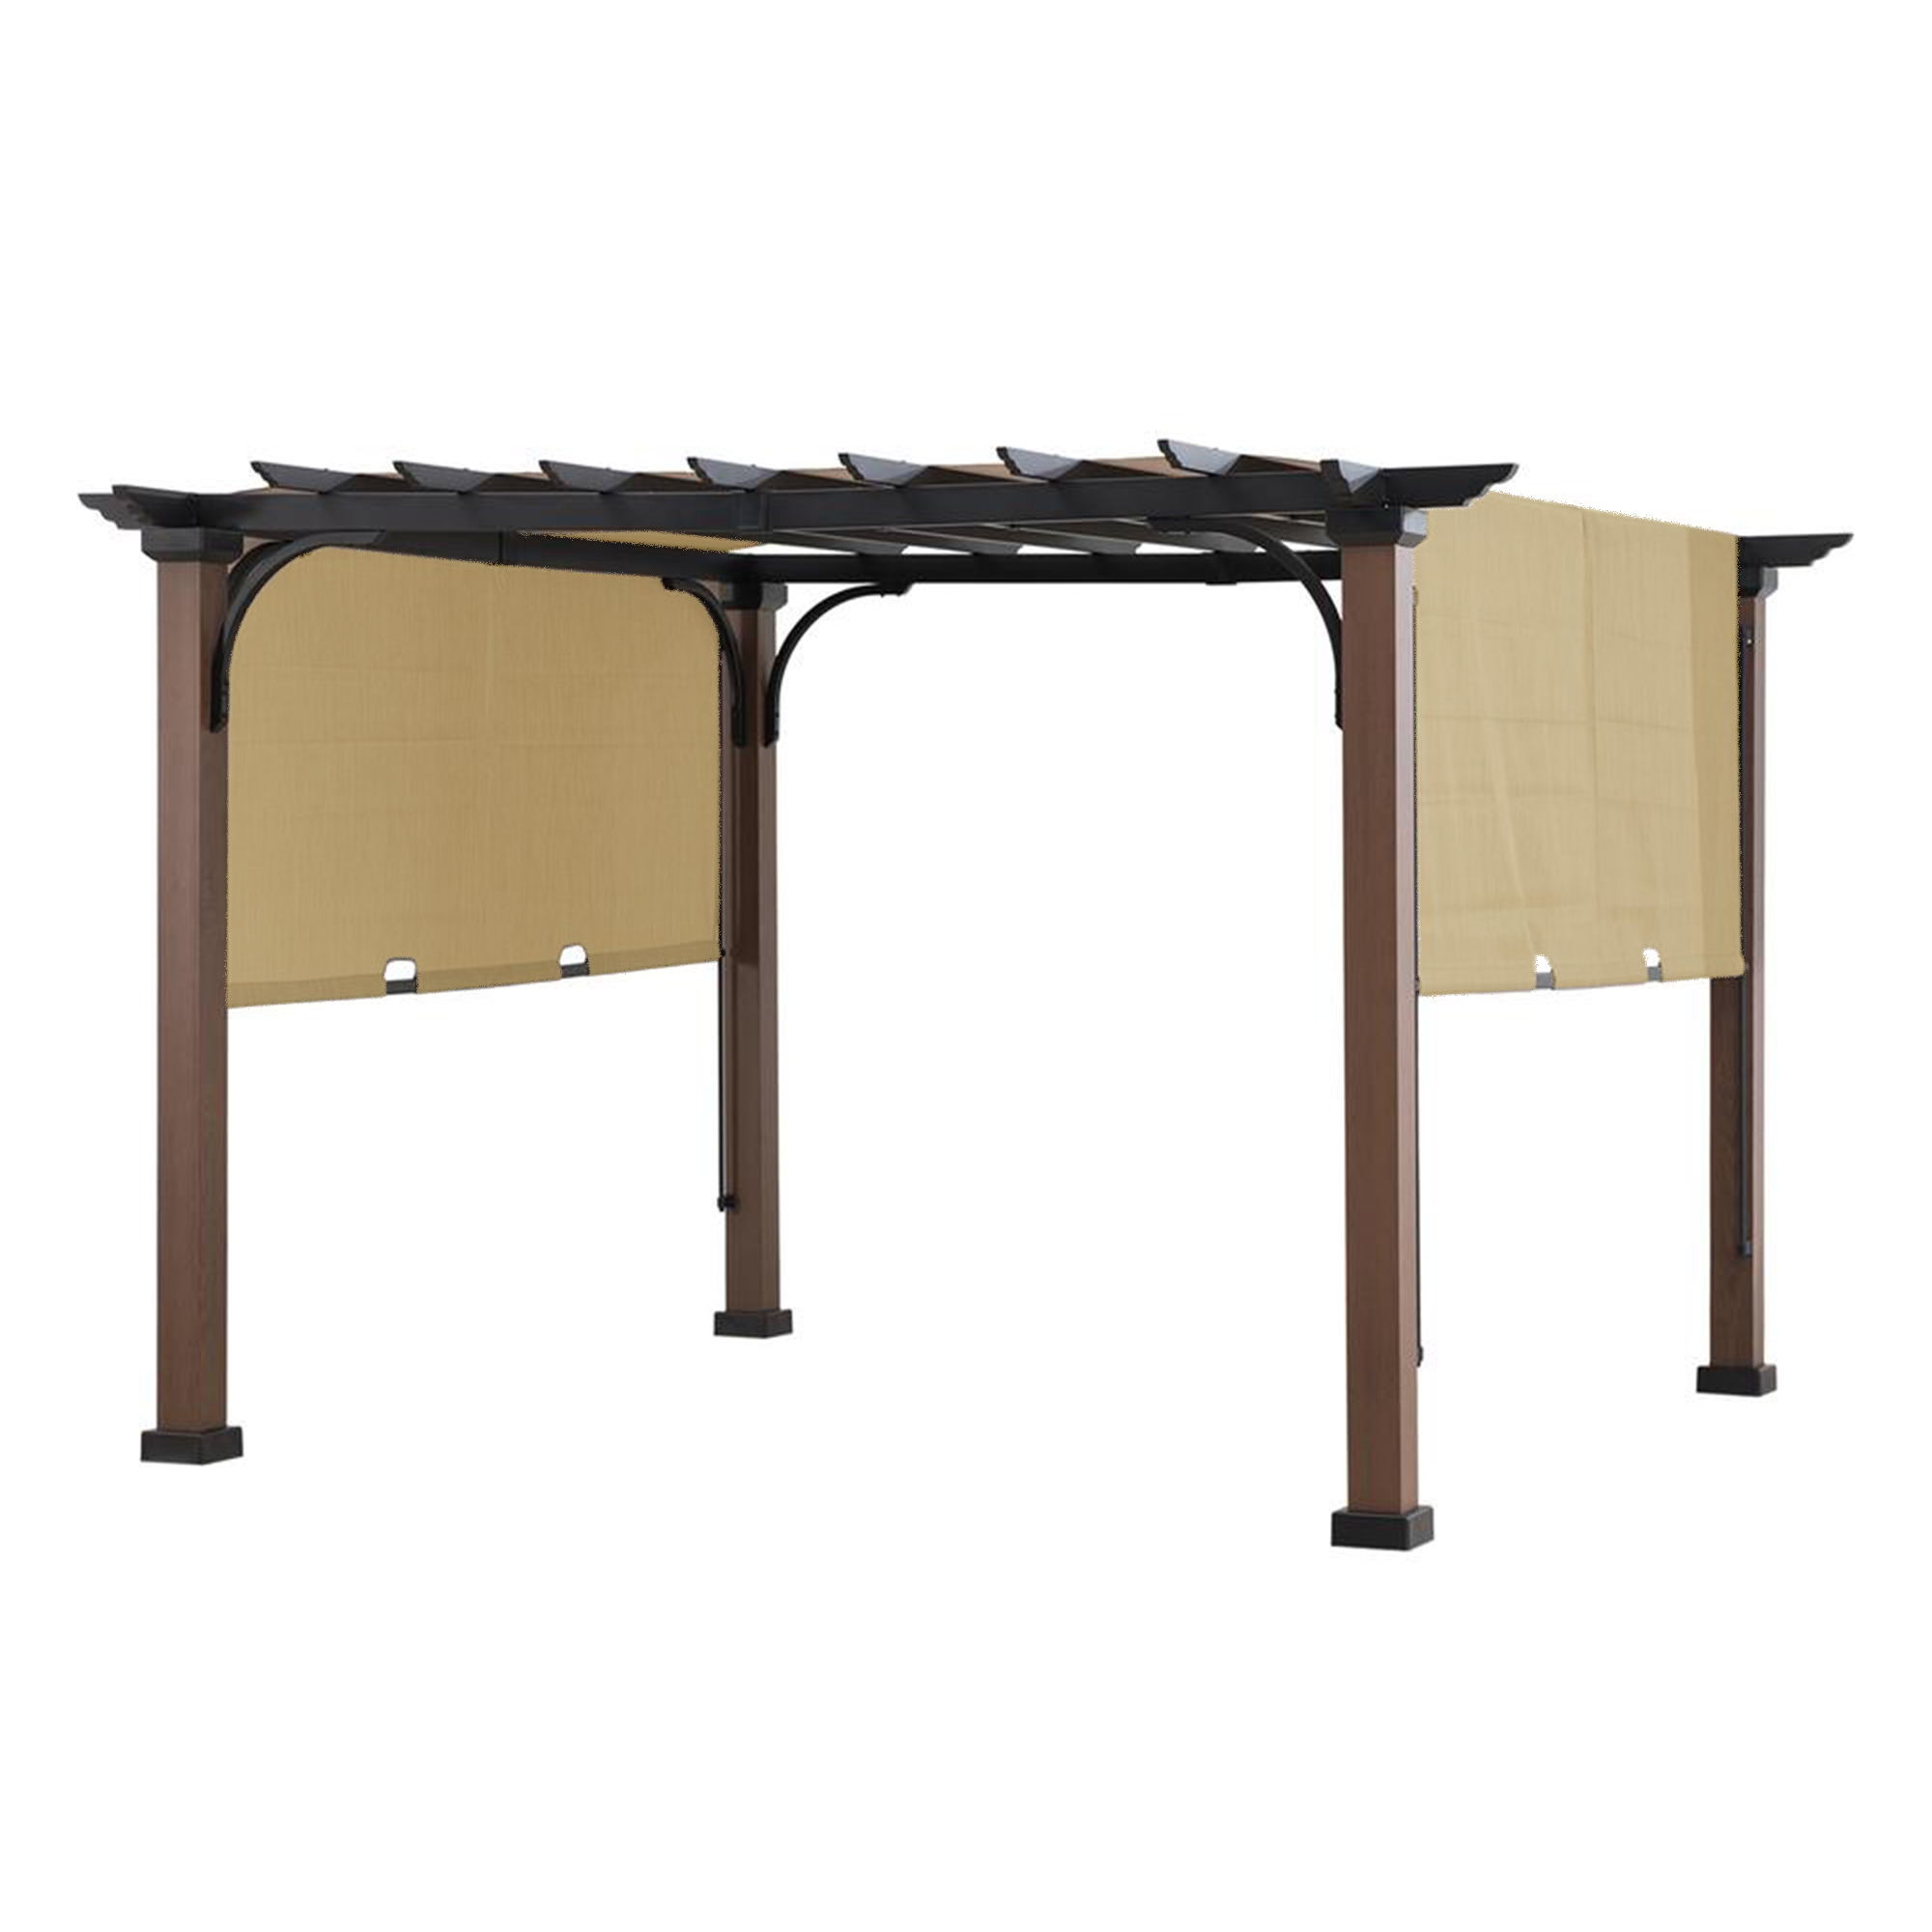 Replacement Canopy for Neuralia Pergola with Wood Look - Riplock